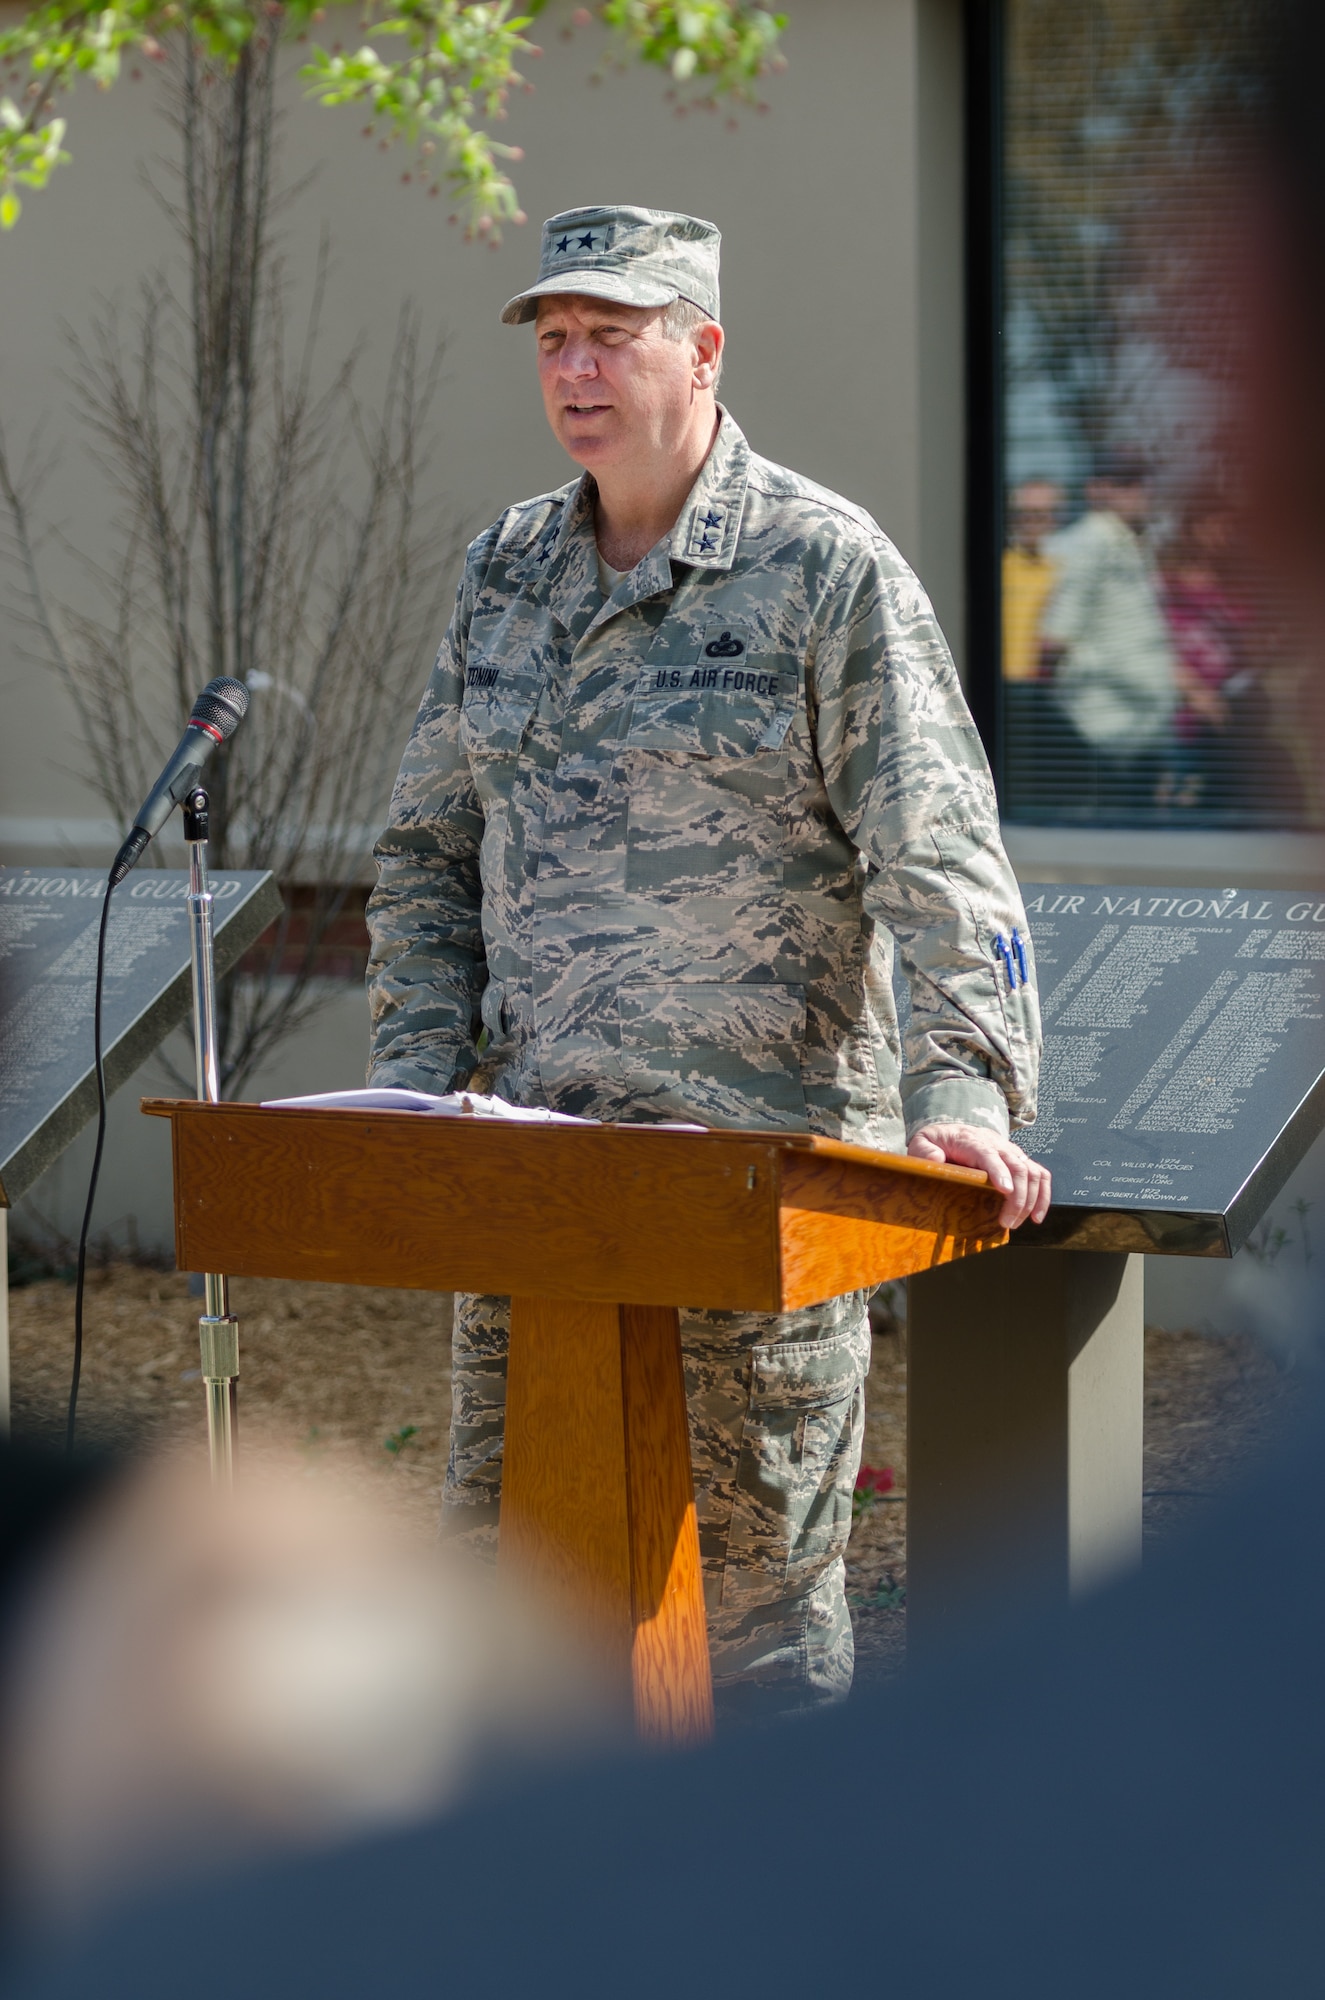 Maj. Gen. Edward Tonini, adjutant general of the Commonwealth of Kentucky, speaks to a crowd of more than 100 Airmen, friends and family during a ceremony honoring retirees at the Kentucky Air National Guard Base in Louisville, Ky., April 12, 2014. Two granite plaques, listing the names of Kentucky Air Guardsmen who retired in 2013, were unveiled during the ceremony. (U.S. Air National Guard photo by Airman 1st Class Joshua Horton)